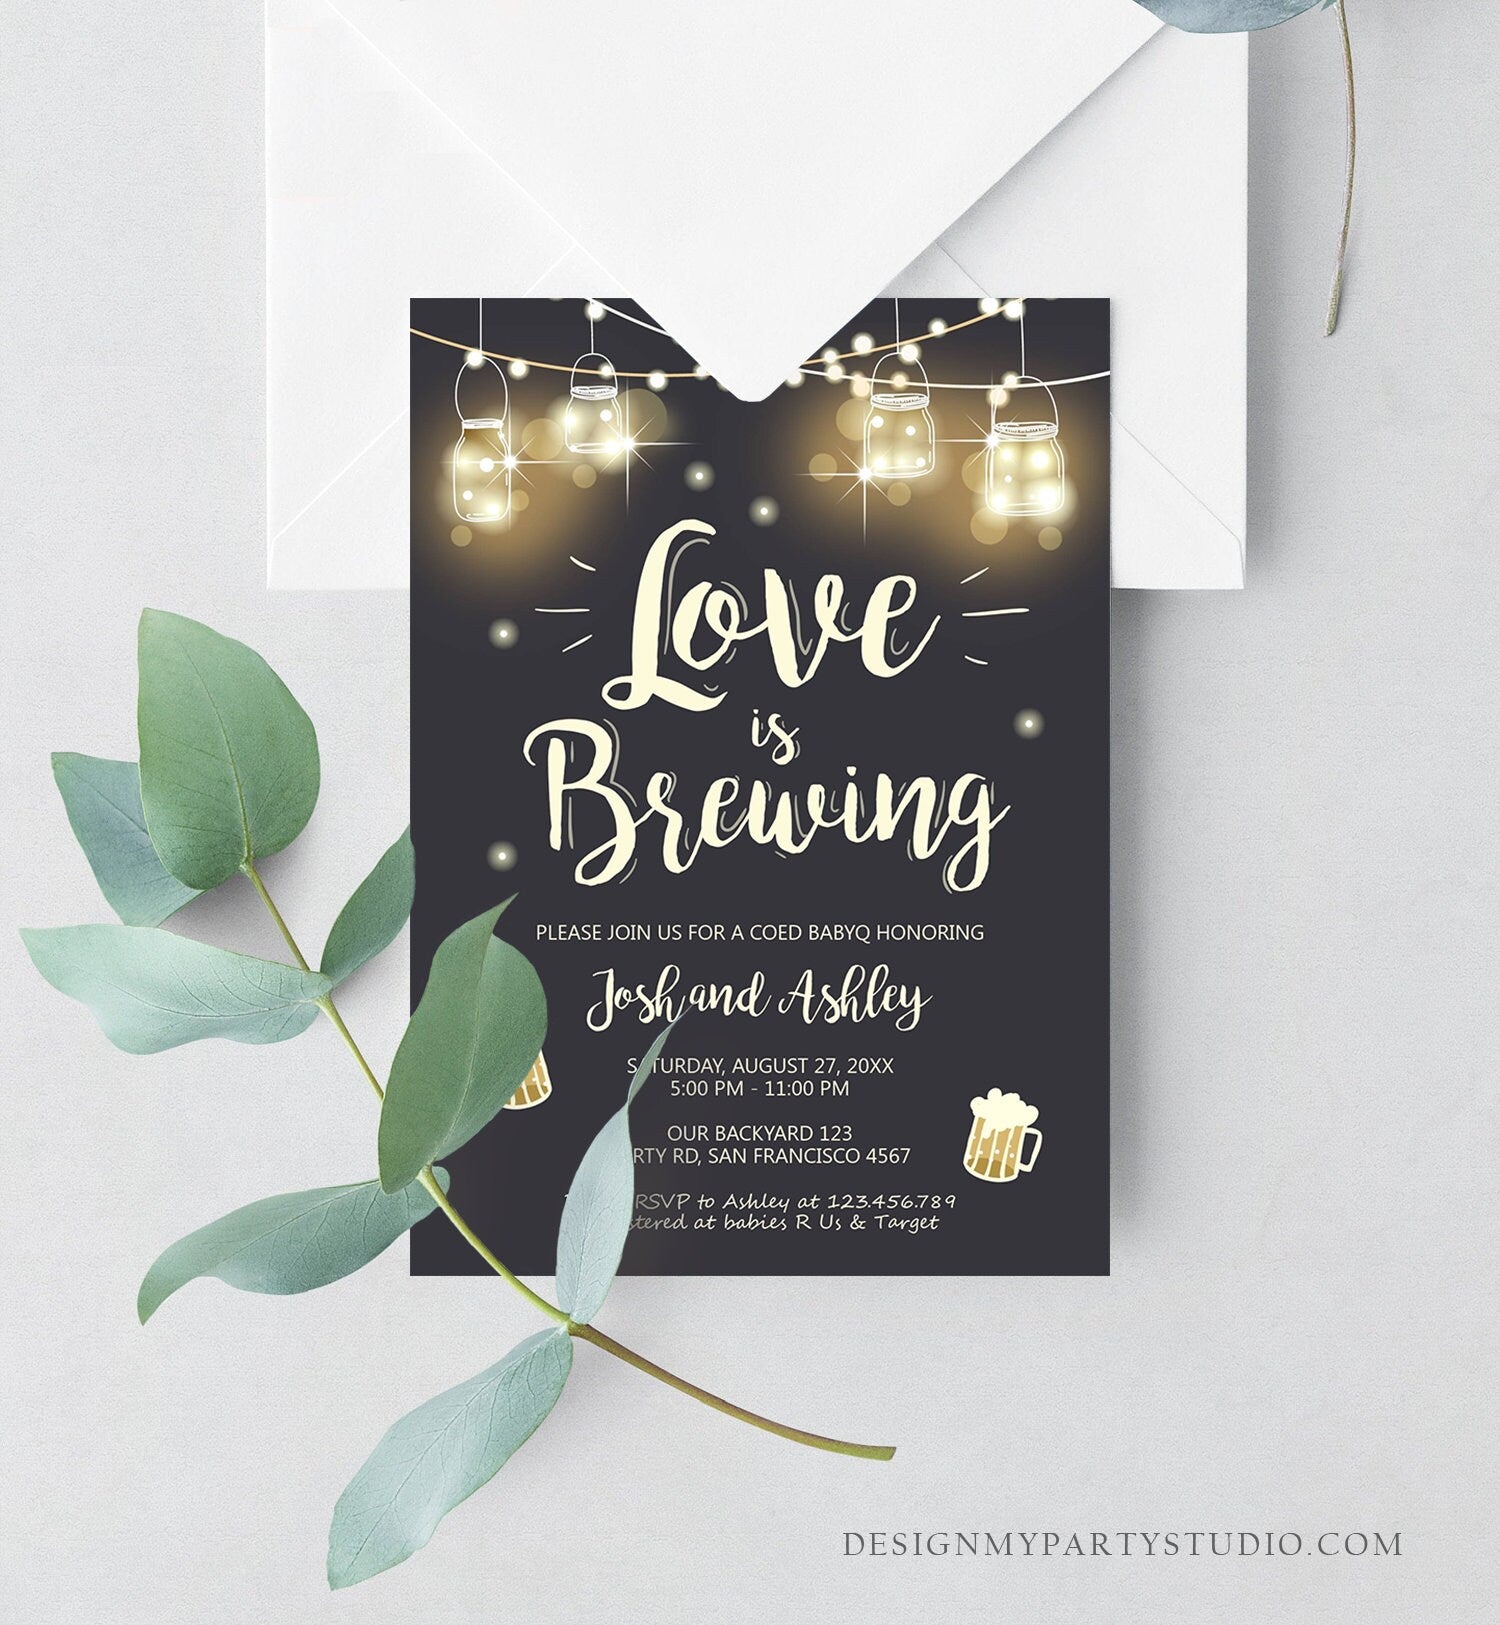 Editable Love is Brewing Invitation Bridal Shower Beer BBQ Rehearsal Dinner Wedding Couples Shower Rustic Download Print Template Corjl 0024